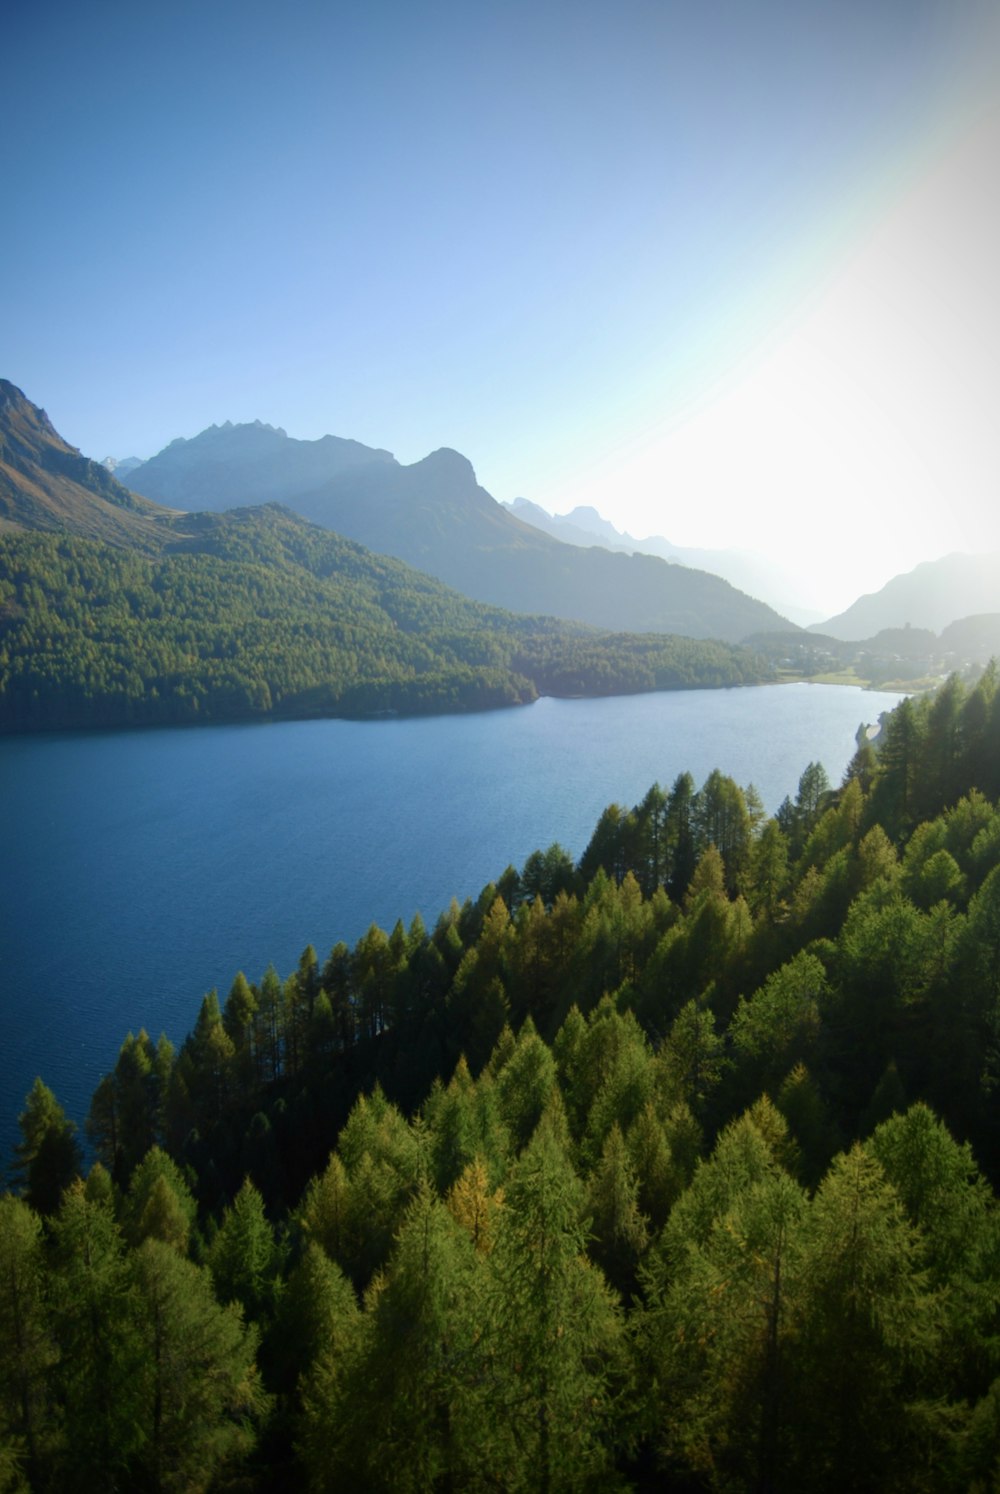 a lake surrounded by green trees and mountains